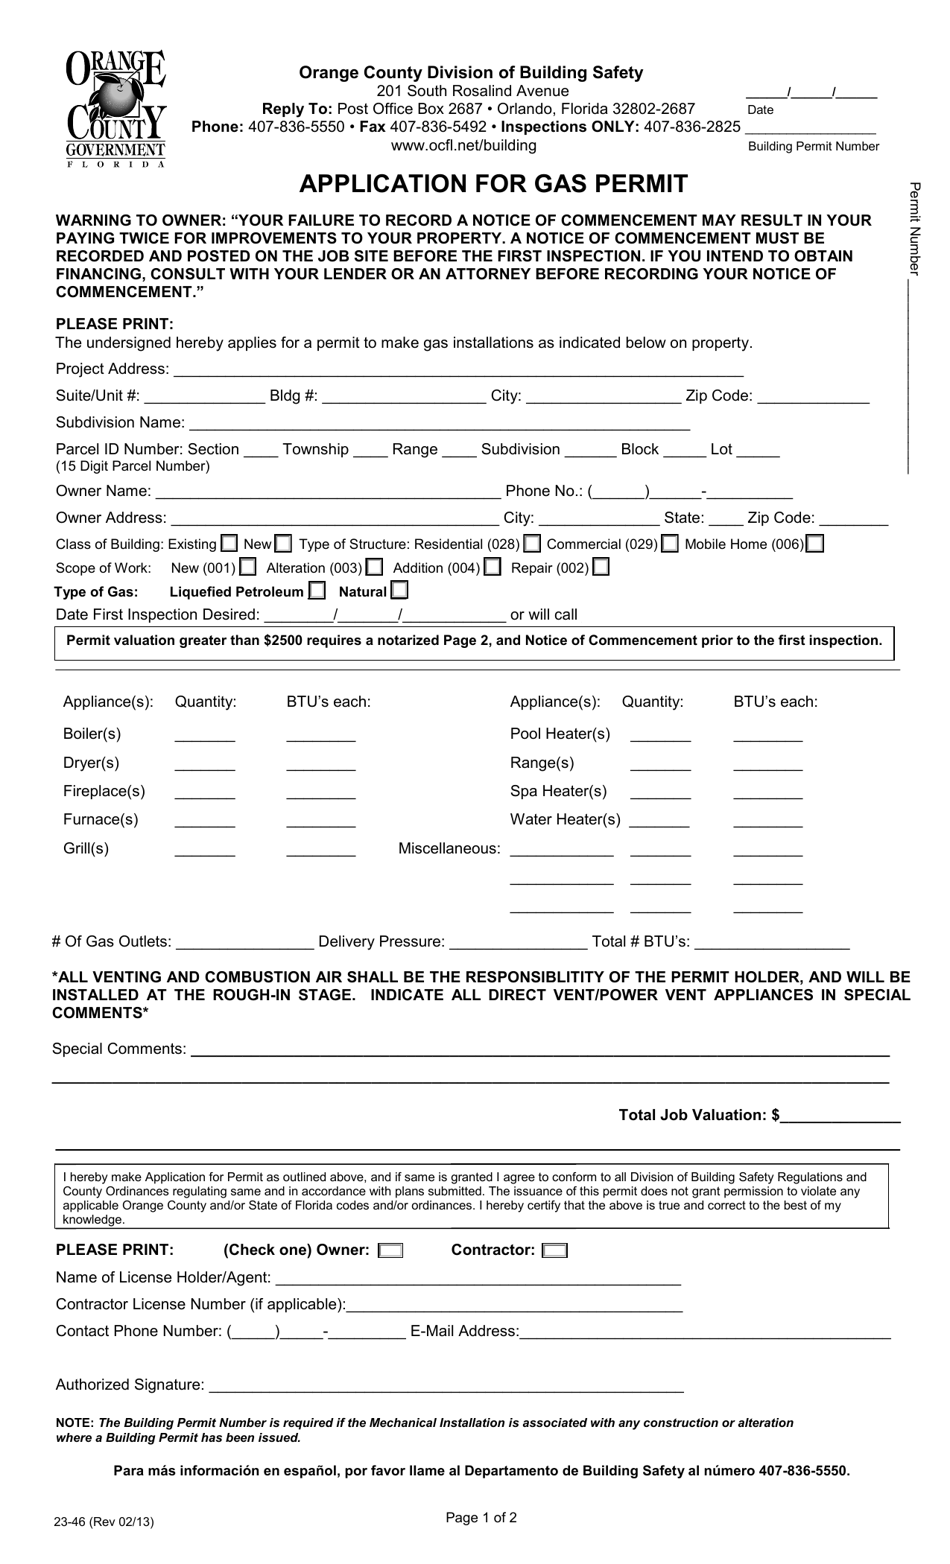 Form 23-46 Application for Gas Permit - Orange County, Florida, Page 1